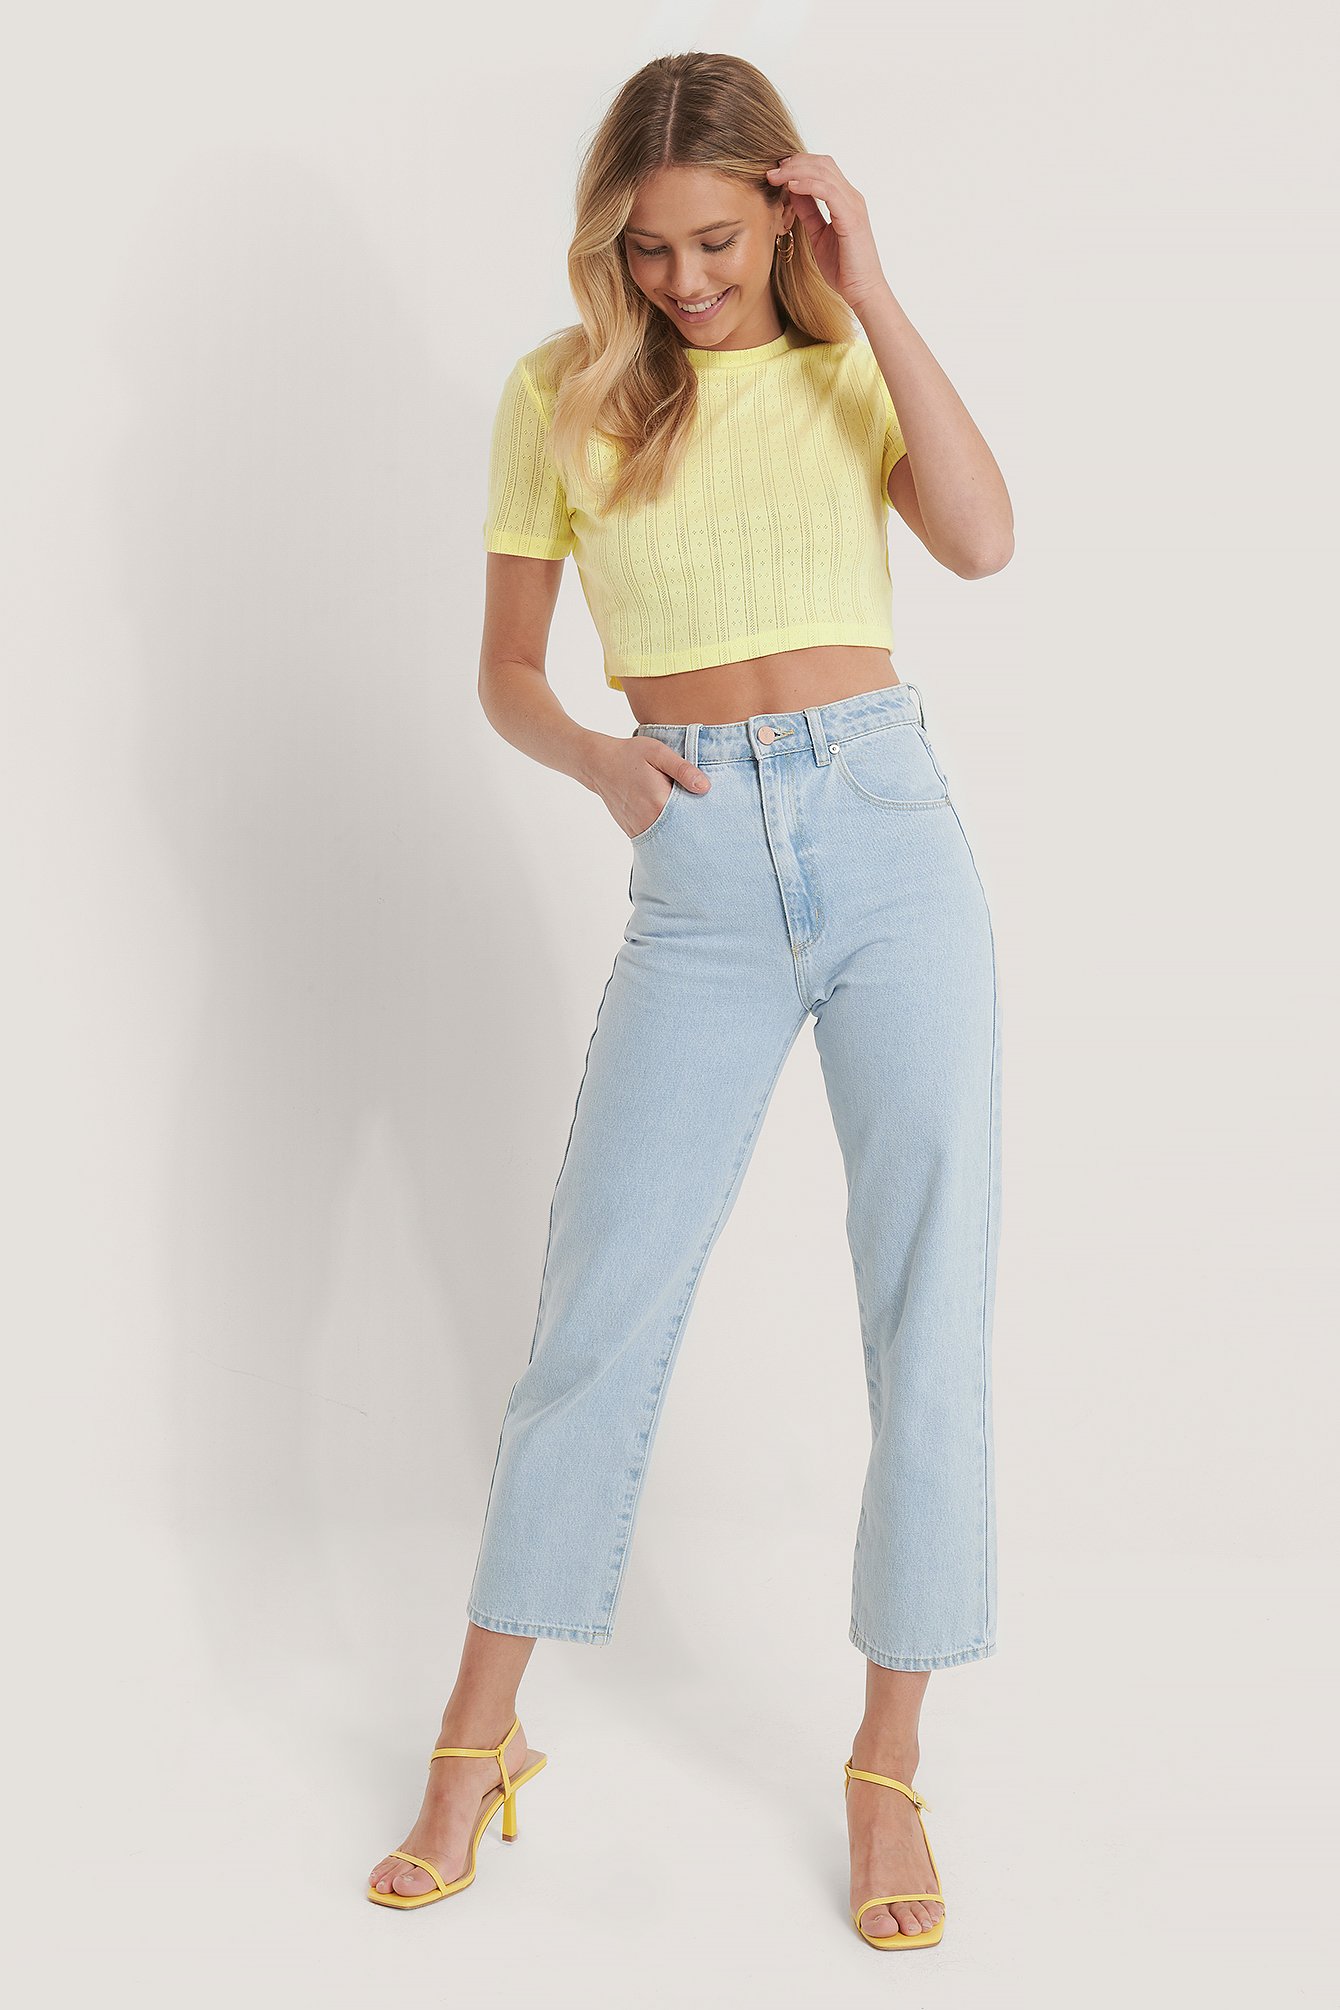 Yellow Structured Cropped Ribbed Tee